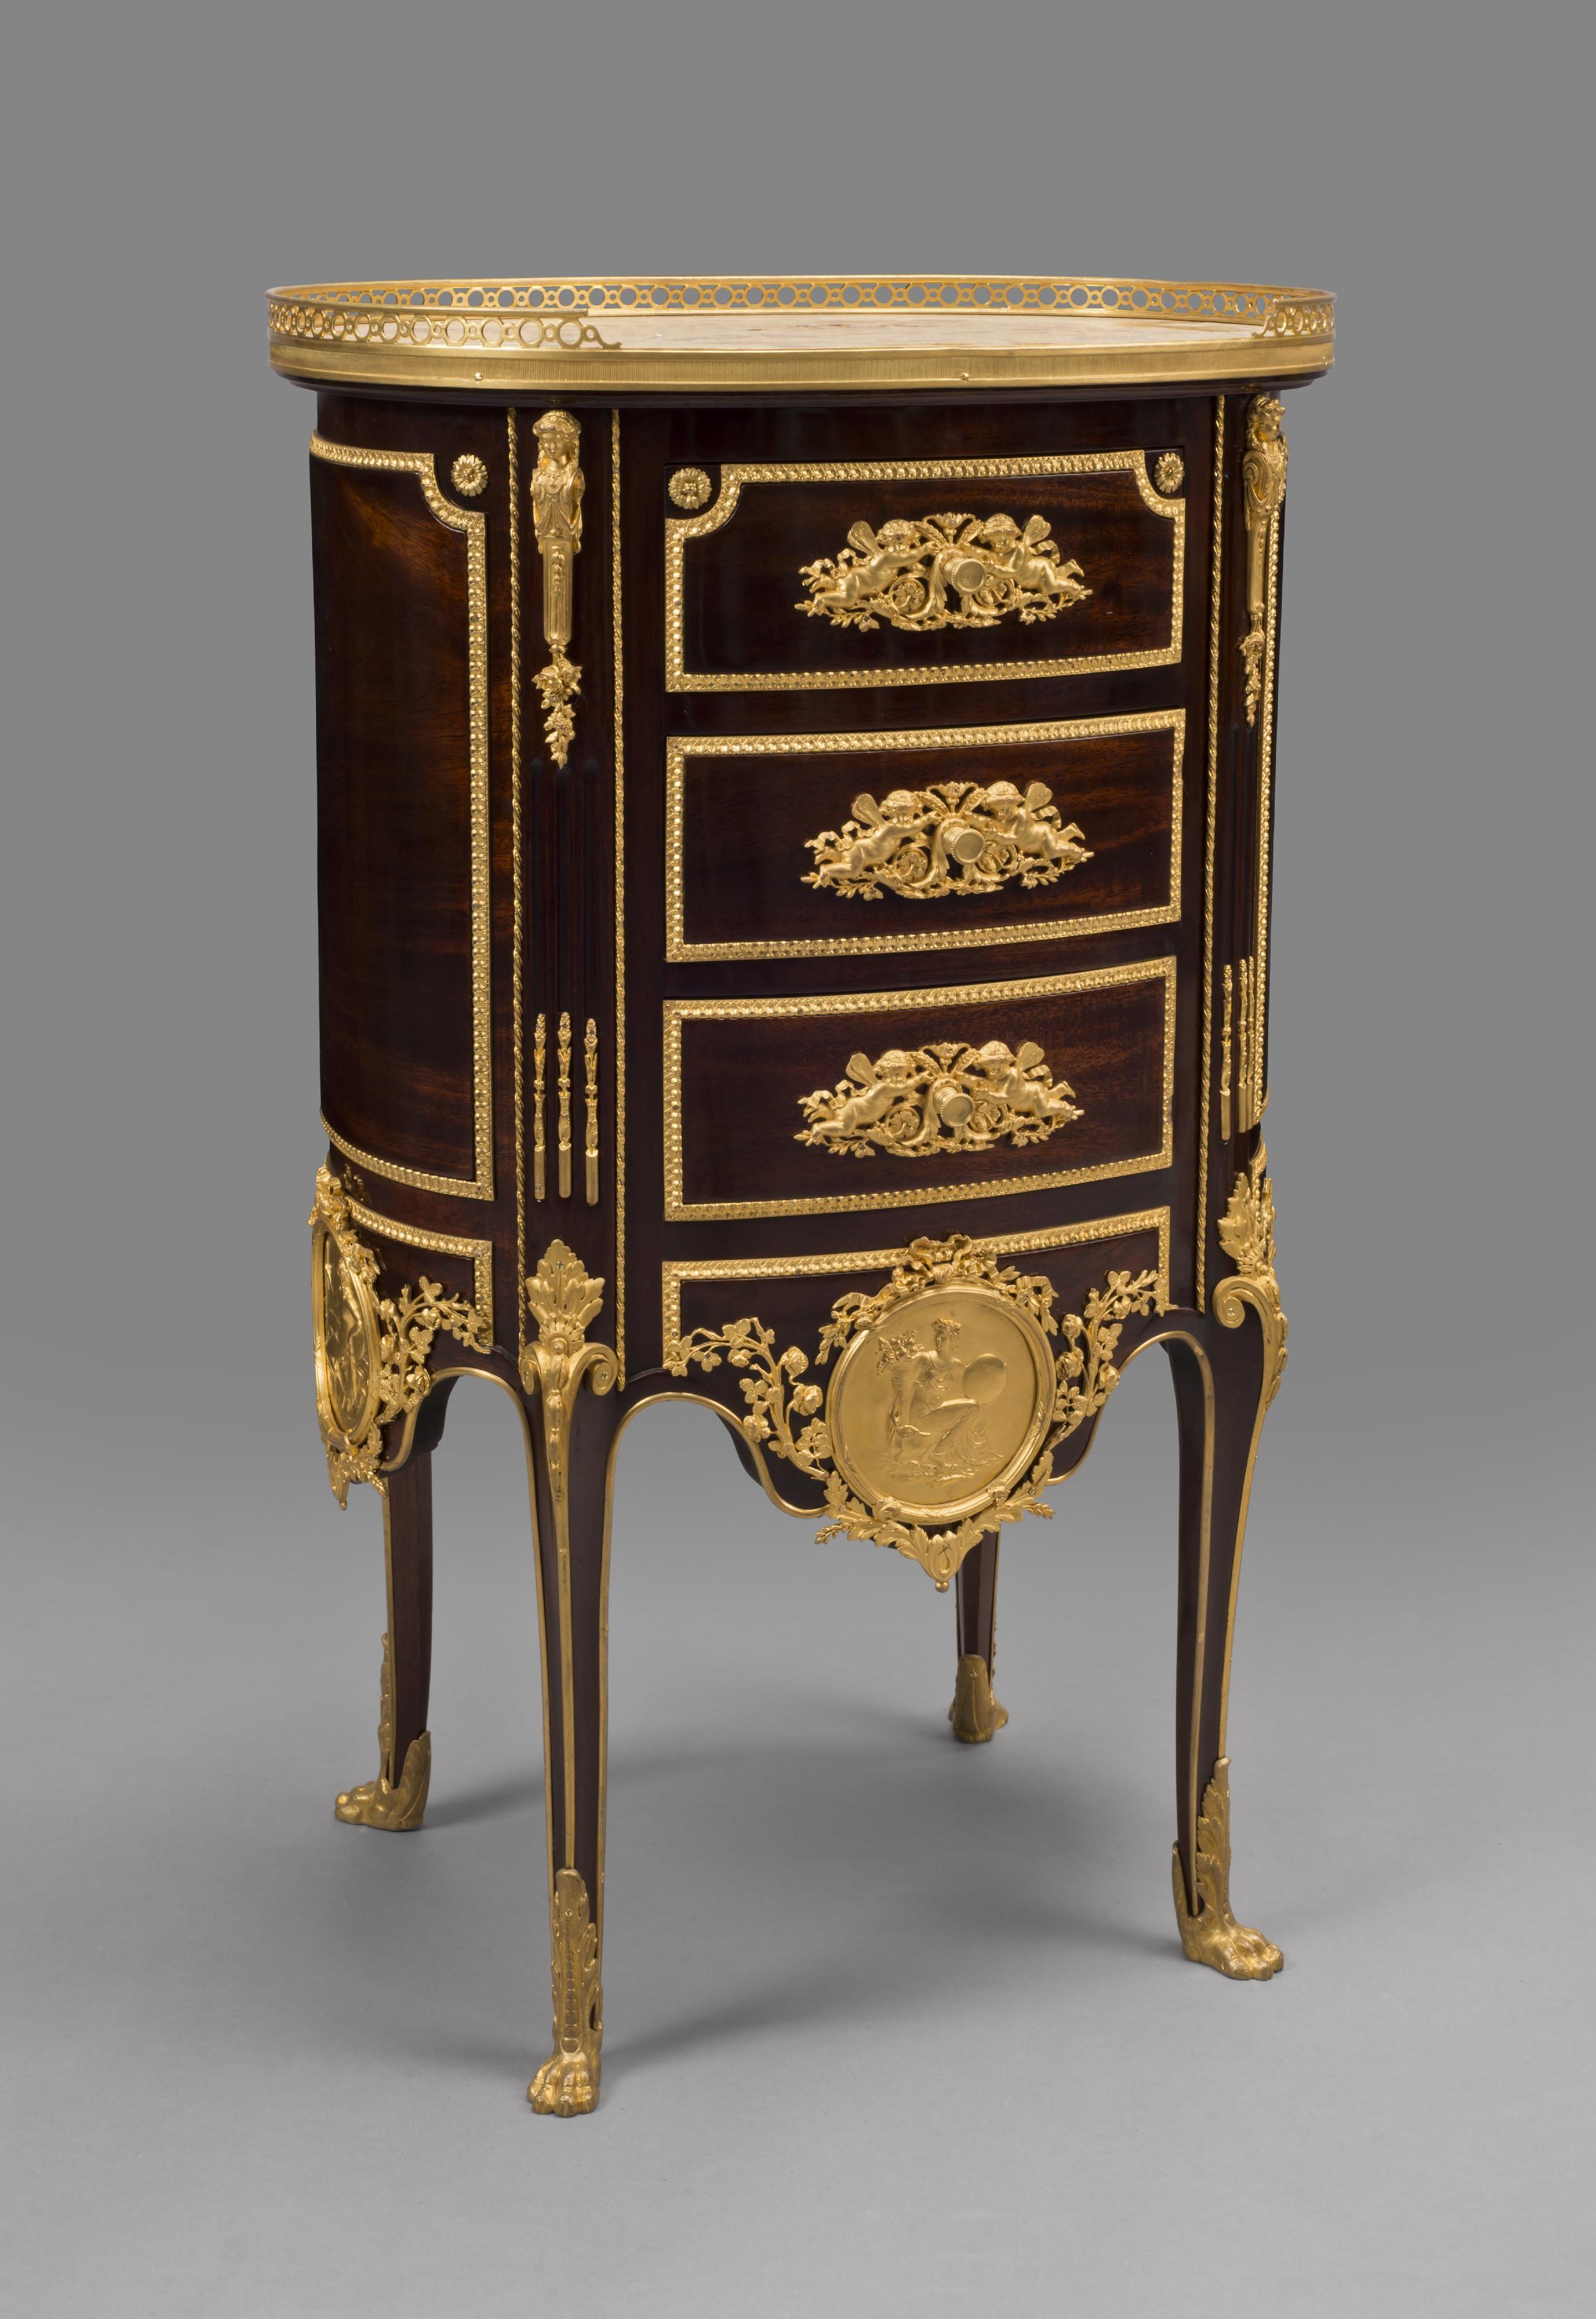 A fine transitional style gilt bronze mounted Mahogany Chiffonier Tambour. 

French, circa 1880. 

This fine chiffonier is of drum shape with a Brèche d’Alep marble top with a three-quarter gallery above three drawers. The cabinet is richly